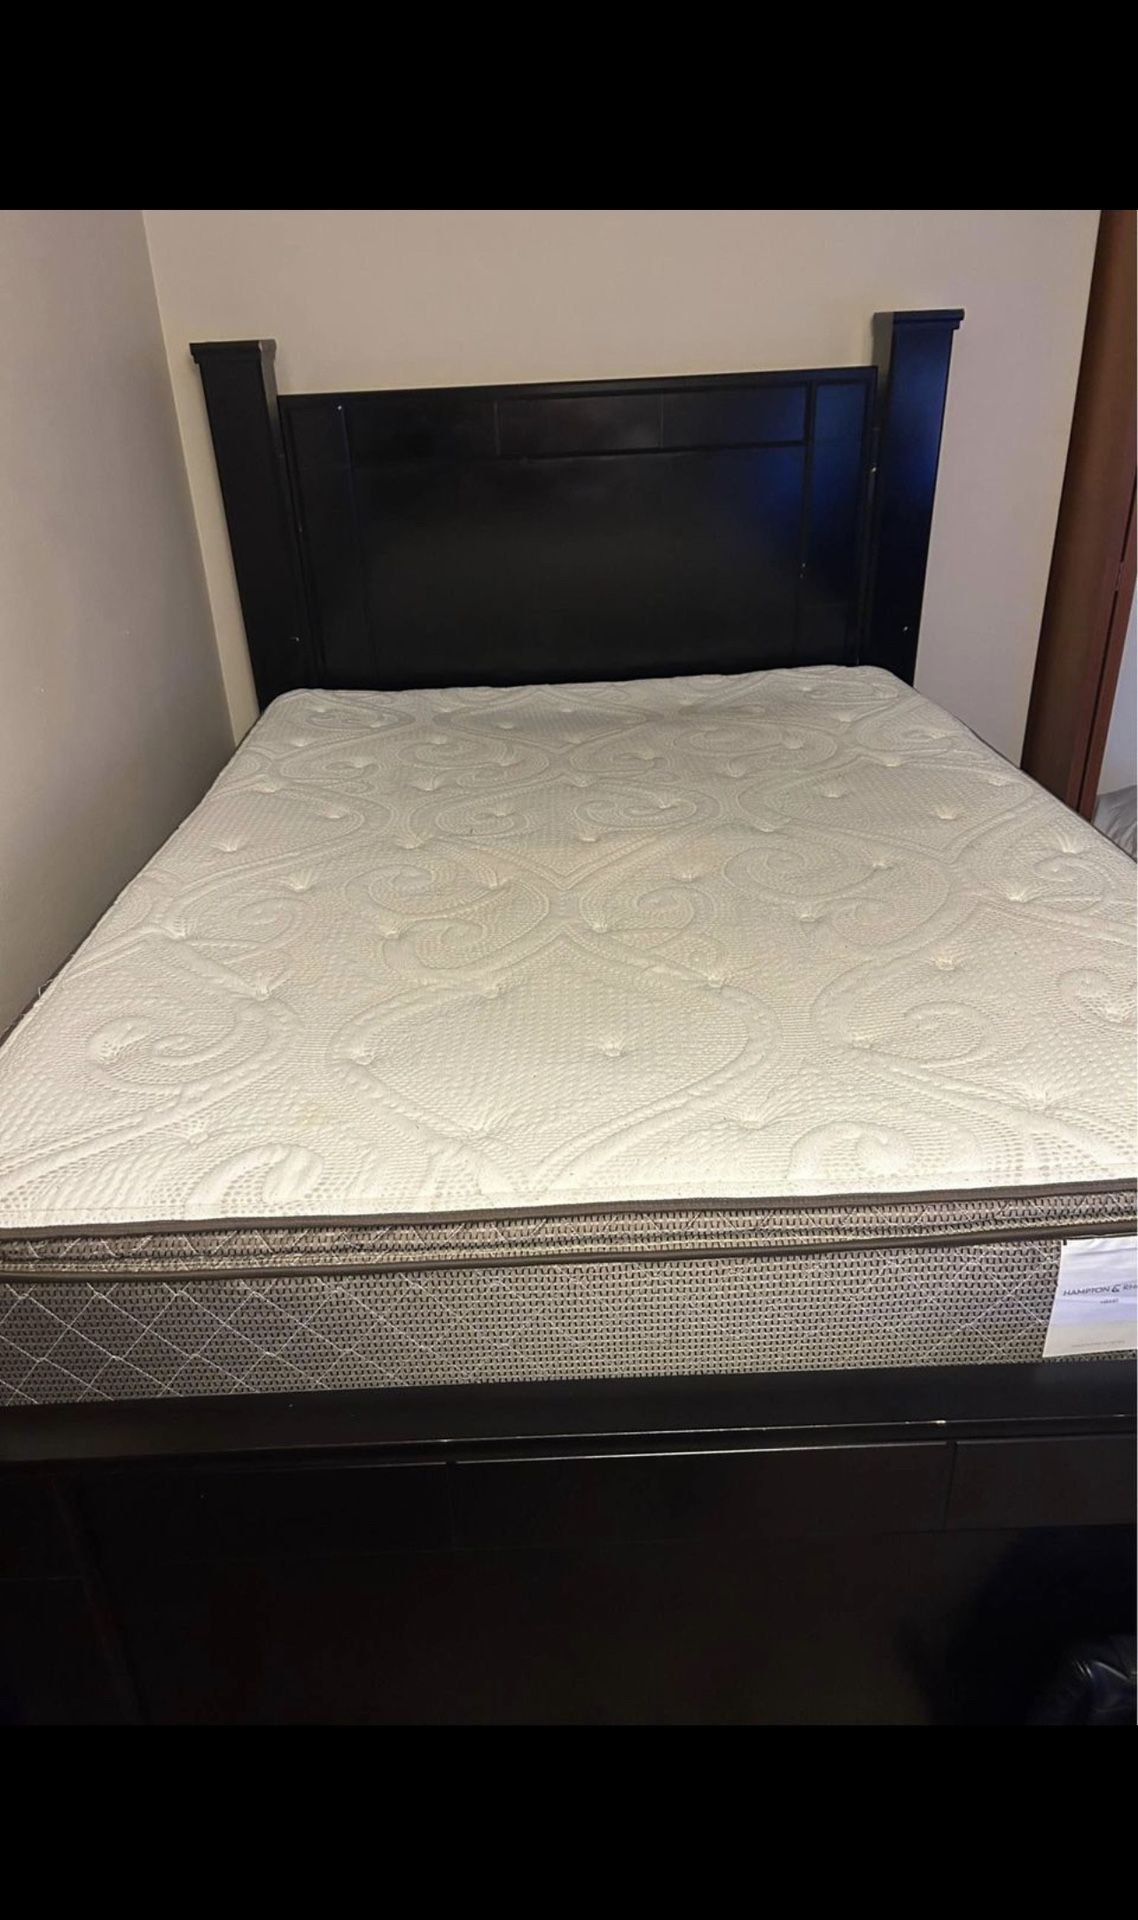 Queen Size Bed For Sale! Everything Included!